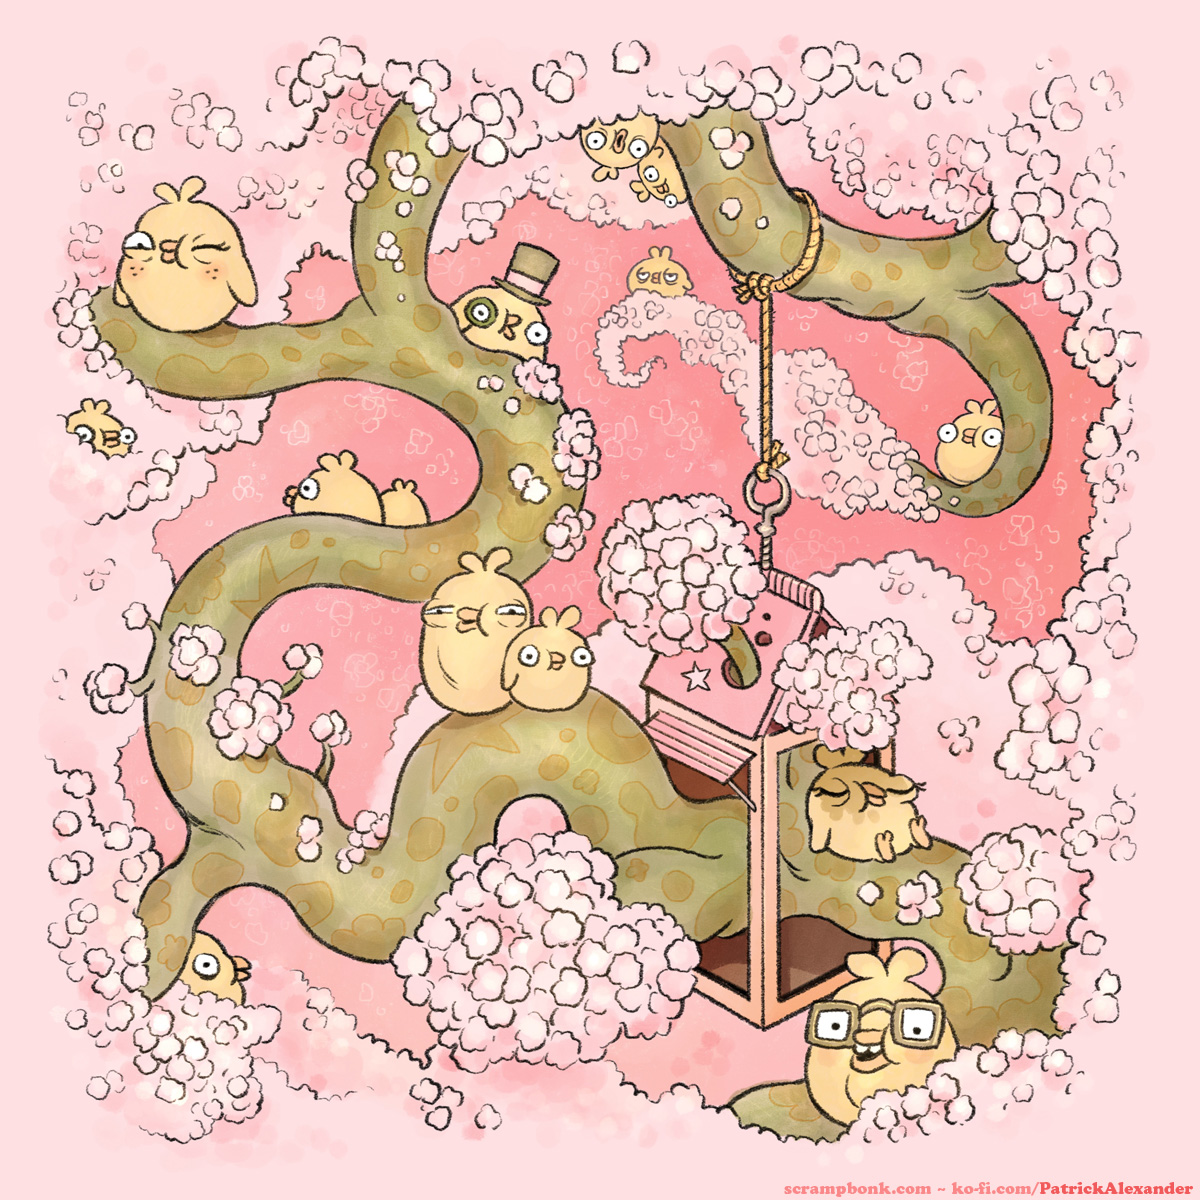 A bunch of bouncy-looking yellow birds roosting on a winding branch, in the midst of fluffy pink blossoms